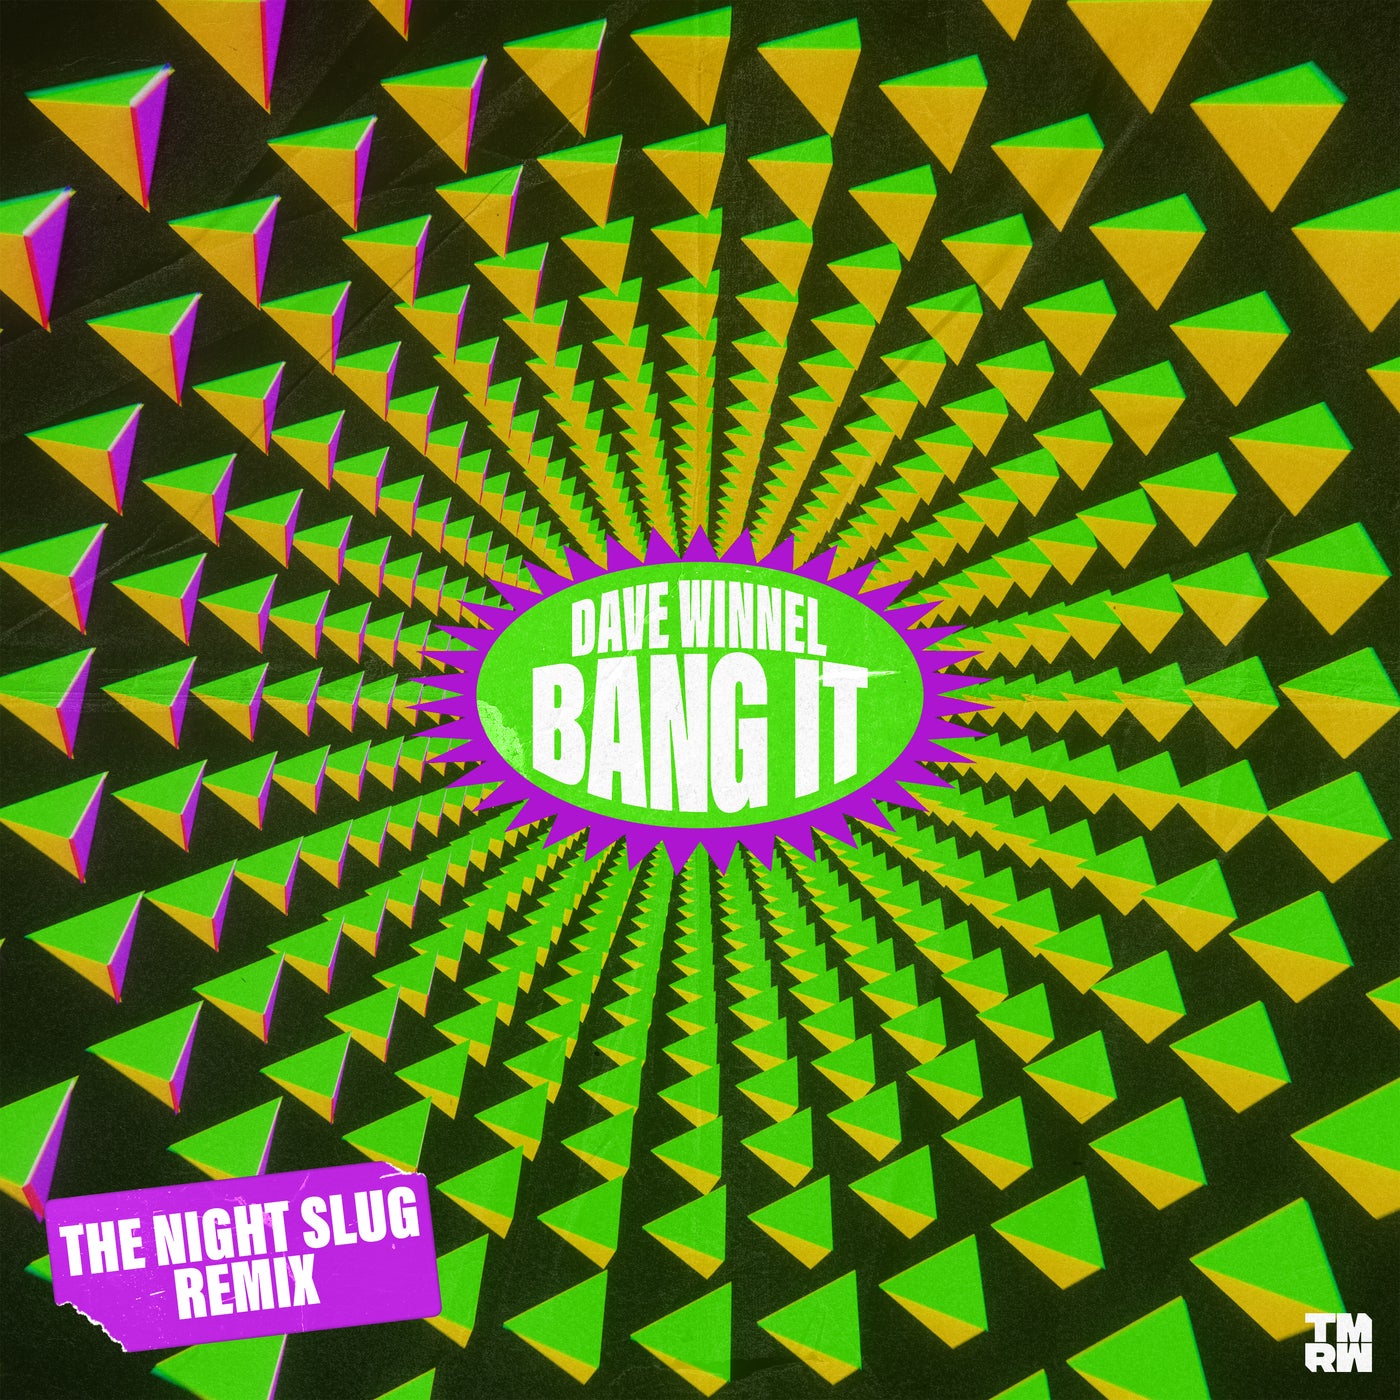 Cover - Dave Winnel - Bang It (The Night Slug Extended Remix)